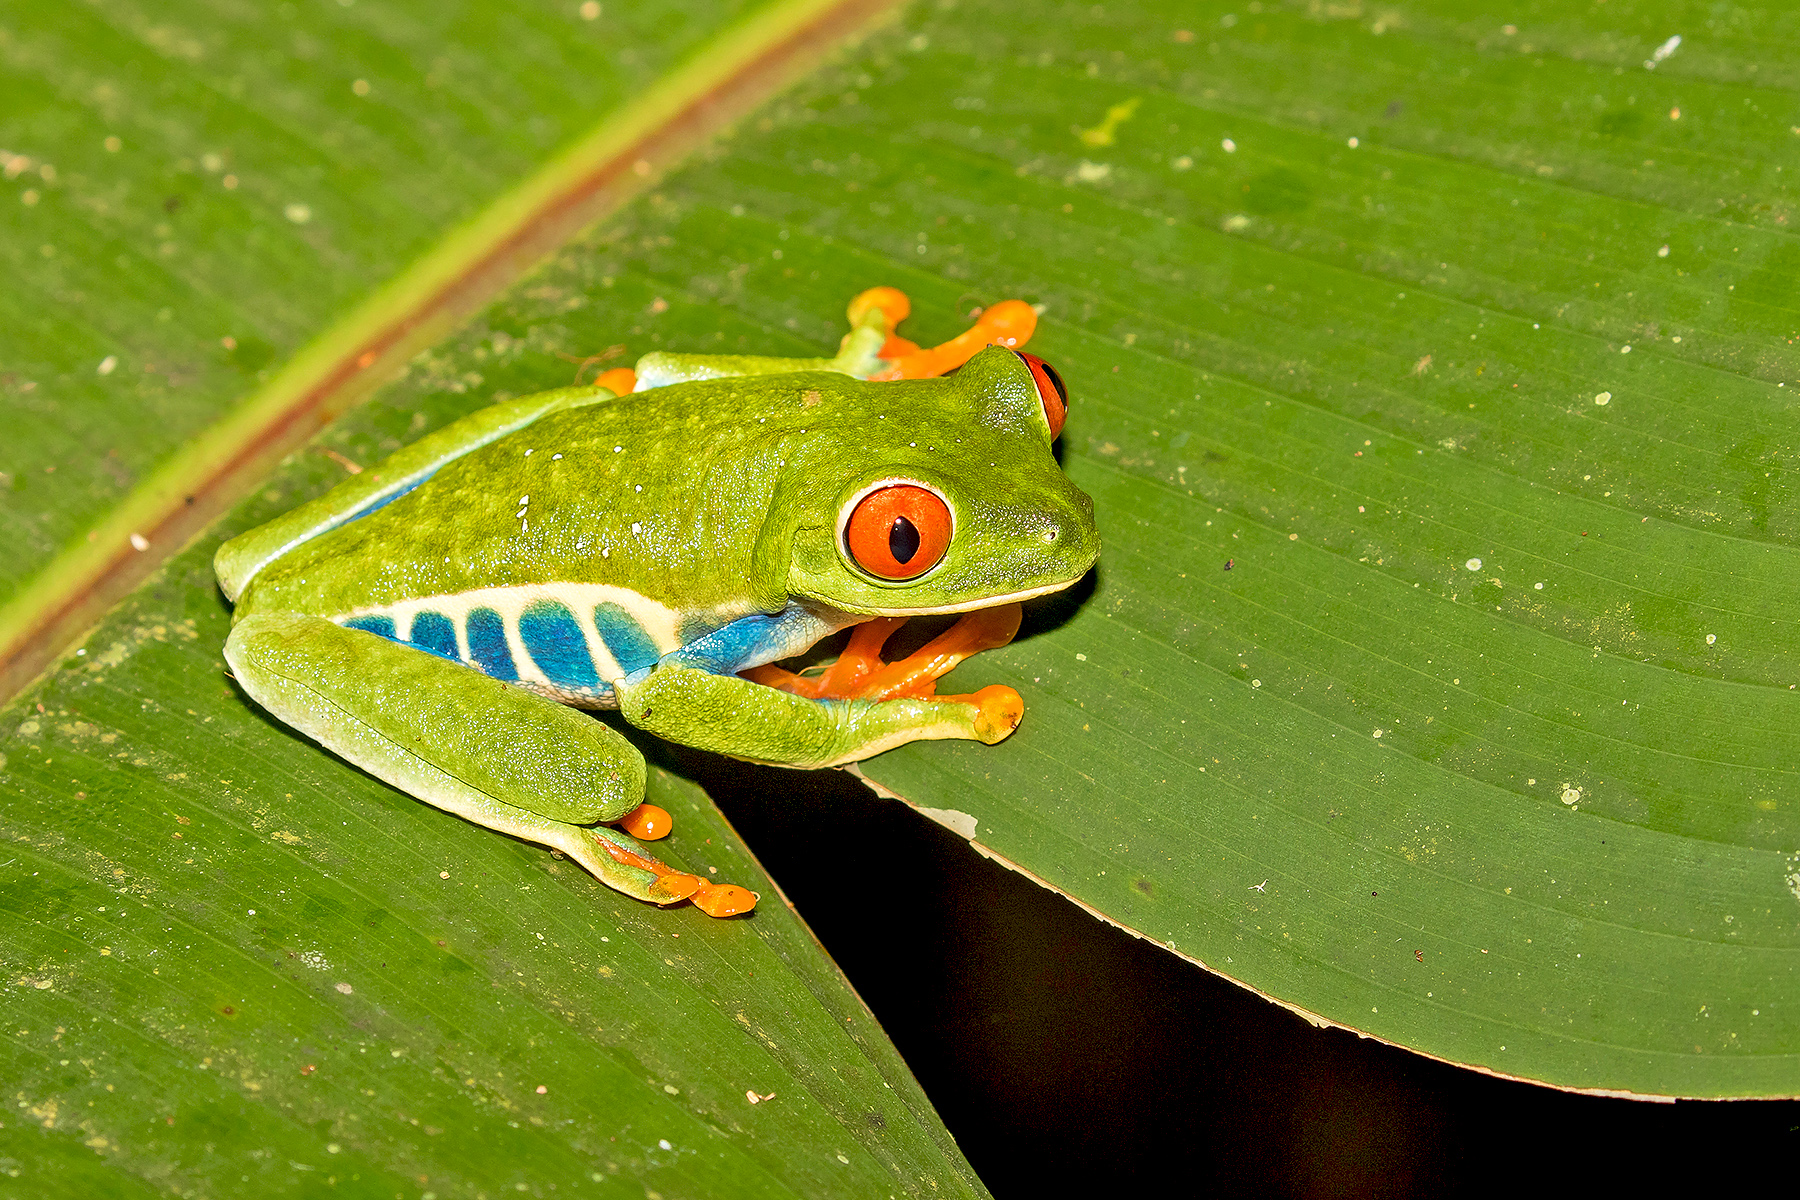 Red-eyed Tree Frog in Costa Rica (image by Pete Morris)